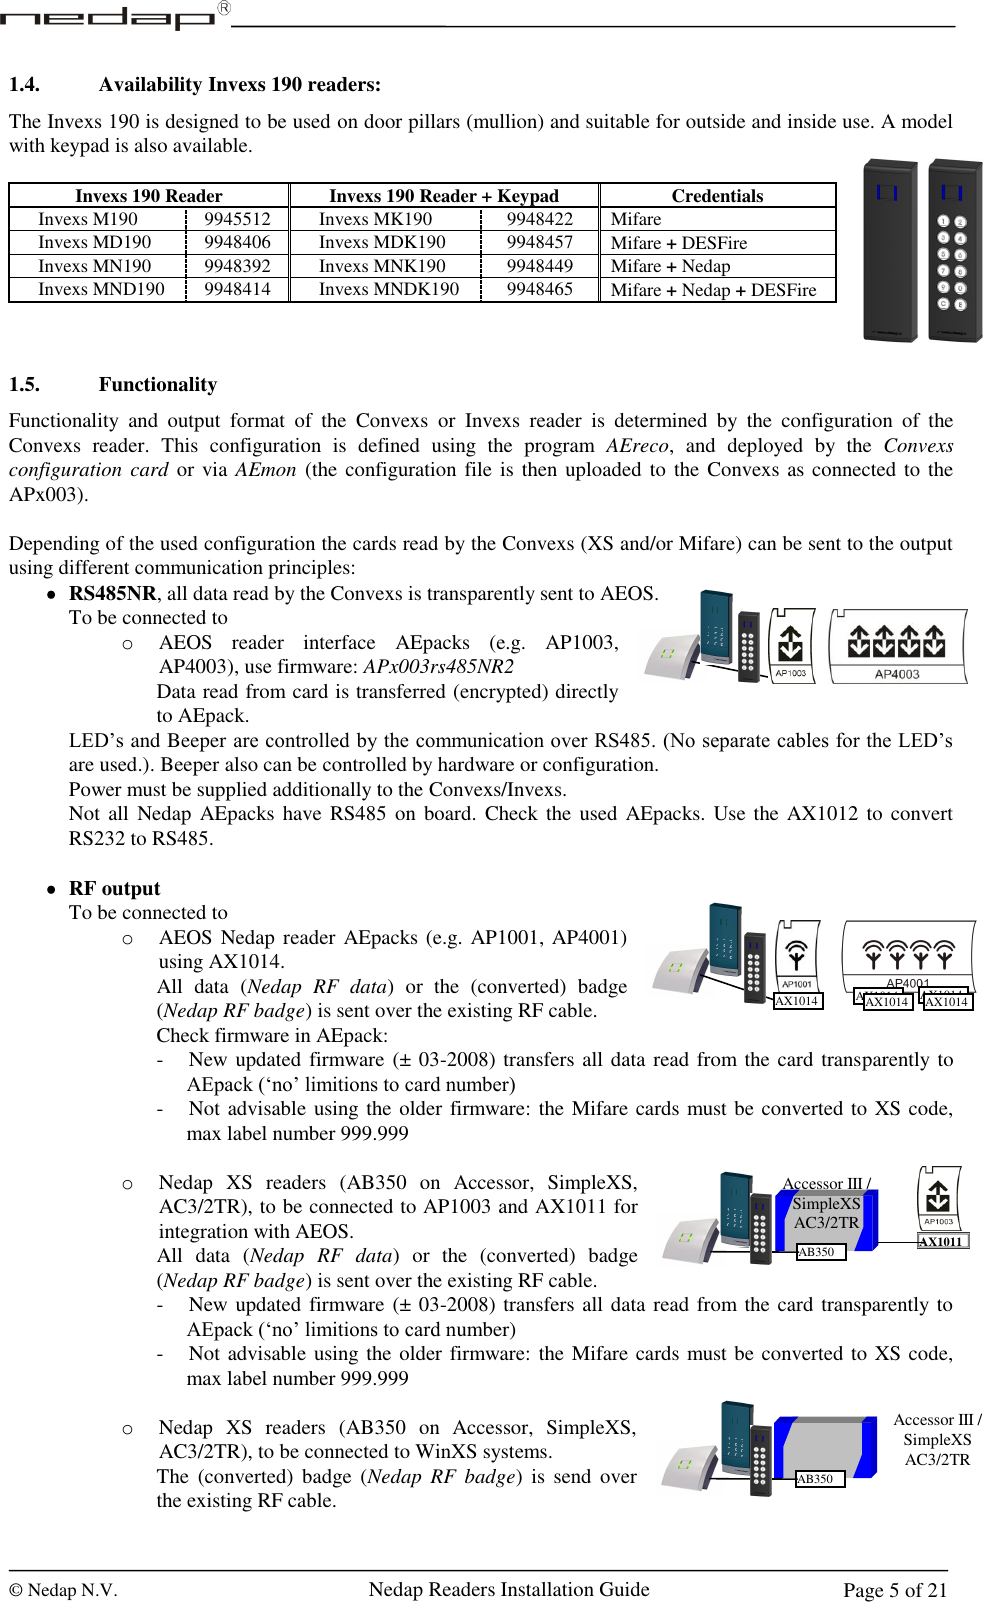  © Nedap N.V.                   Nedap Readers Installation Guide     Page 5 of 21 Accessor III / SimpleXS AC3/2TR AB350 AX1011 1.4. Availability Invexs 190 readers: The Invexs 190 is designed to be used on door pillars (mullion) and suitable for outside and inside use. A model with keypad is also available.  Invexs 190 Reader Invexs 190 Reader + Keypad Credentials   Invexs M190 9945512   Invexs MK190 9948422 Mifare   Invexs MD190 9948406   Invexs MDK190 9948457 Mifare + DESFire   Invexs MN190 9948392   Invexs MNK190 9948449 Mifare + Nedap   Invexs MND190 9948414   Invexs MNDK190 9948465 Mifare + Nedap + DESFire    1.5. Functionality Functionality  and  output  format  of  the  Convexs  or  Invexs  reader  is  determined  by  the  configuration  of  the Convexs  reader.  This  configuration  is  defined  using  the  program  AEreco,  and  deployed  by  the  Convexs configuration card or via AEmon (the configuration file is  then uploaded to the Convexs as connected to the APx003).   Depending of the used configuration the cards read by the Convexs (XS and/or Mifare) can be sent to the output using different communication principles:  RS485NR, all data read by the Convexs is transparently sent to AEOS. To be connected to o AEOS  reader  interface  AEpacks  (e.g.  AP1003, AP4003), use firmware: APx003rs485NR2 Data read from card is transferred (encrypted) directly to AEpack. LED’s and Beeper are controlled by the communication over RS485. (No separate cables for the LED’s are used.). Beeper also can be controlled by hardware or configuration. Power must be supplied additionally to the Convexs/Invexs. Not  all  Nedap  AEpacks  have RS485  on  board. Check the  used AEpacks. Use the AX1012 to  convert RS232 to RS485.   RF output To be connected to o AEOS Nedap reader AEpacks (e.g. AP1001, AP4001) using AX1014. All  data  (Nedap RF  data)  or  the  (converted)  badge (Nedap RF badge) is sent over the existing RF cable. Check firmware in AEpack:  - New updated firmware (± 03-2008) transfers all data read from the card transparently to AEpack (‘no’ limitions to card number) - Not advisable using the older firmware: the Mifare cards must be converted to XS code, max label number 999.999  o Nedap  XS  readers  (AB350  on  Accessor,  SimpleXS, AC3/2TR), to be connected to AP1003 and AX1011 for integration with AEOS. All  data  (Nedap RF  data)  or  the  (converted)  badge (Nedap RF badge) is sent over the existing RF cable. - New updated firmware (± 03-2008) transfers all data read from the card transparently to AEpack (‘no’ limitions to card number) - Not advisable using the older firmware: the Mifare cards must be converted to XS code, max label number 999.999  o Nedap  XS  readers  (AB350  on  Accessor,  SimpleXS, AC3/2TR), to be connected to WinXS systems. The  (converted)  badge (Nedap RF  badge)  is  send over the existing RF cable. AX1014 AX1014 AX1014 AX1014 AX1014 Accessor III / SimpleXS AC3/2TR AB350 1 2 3 4 5 6 7 8 9 C 0 E 1 2 3 4 5 6 7 8 9 C 0 E 1 2 3 4 5 6 7 8 9 C 0 E 1 2 3 4 5 6 7 8 9 C 0 E 